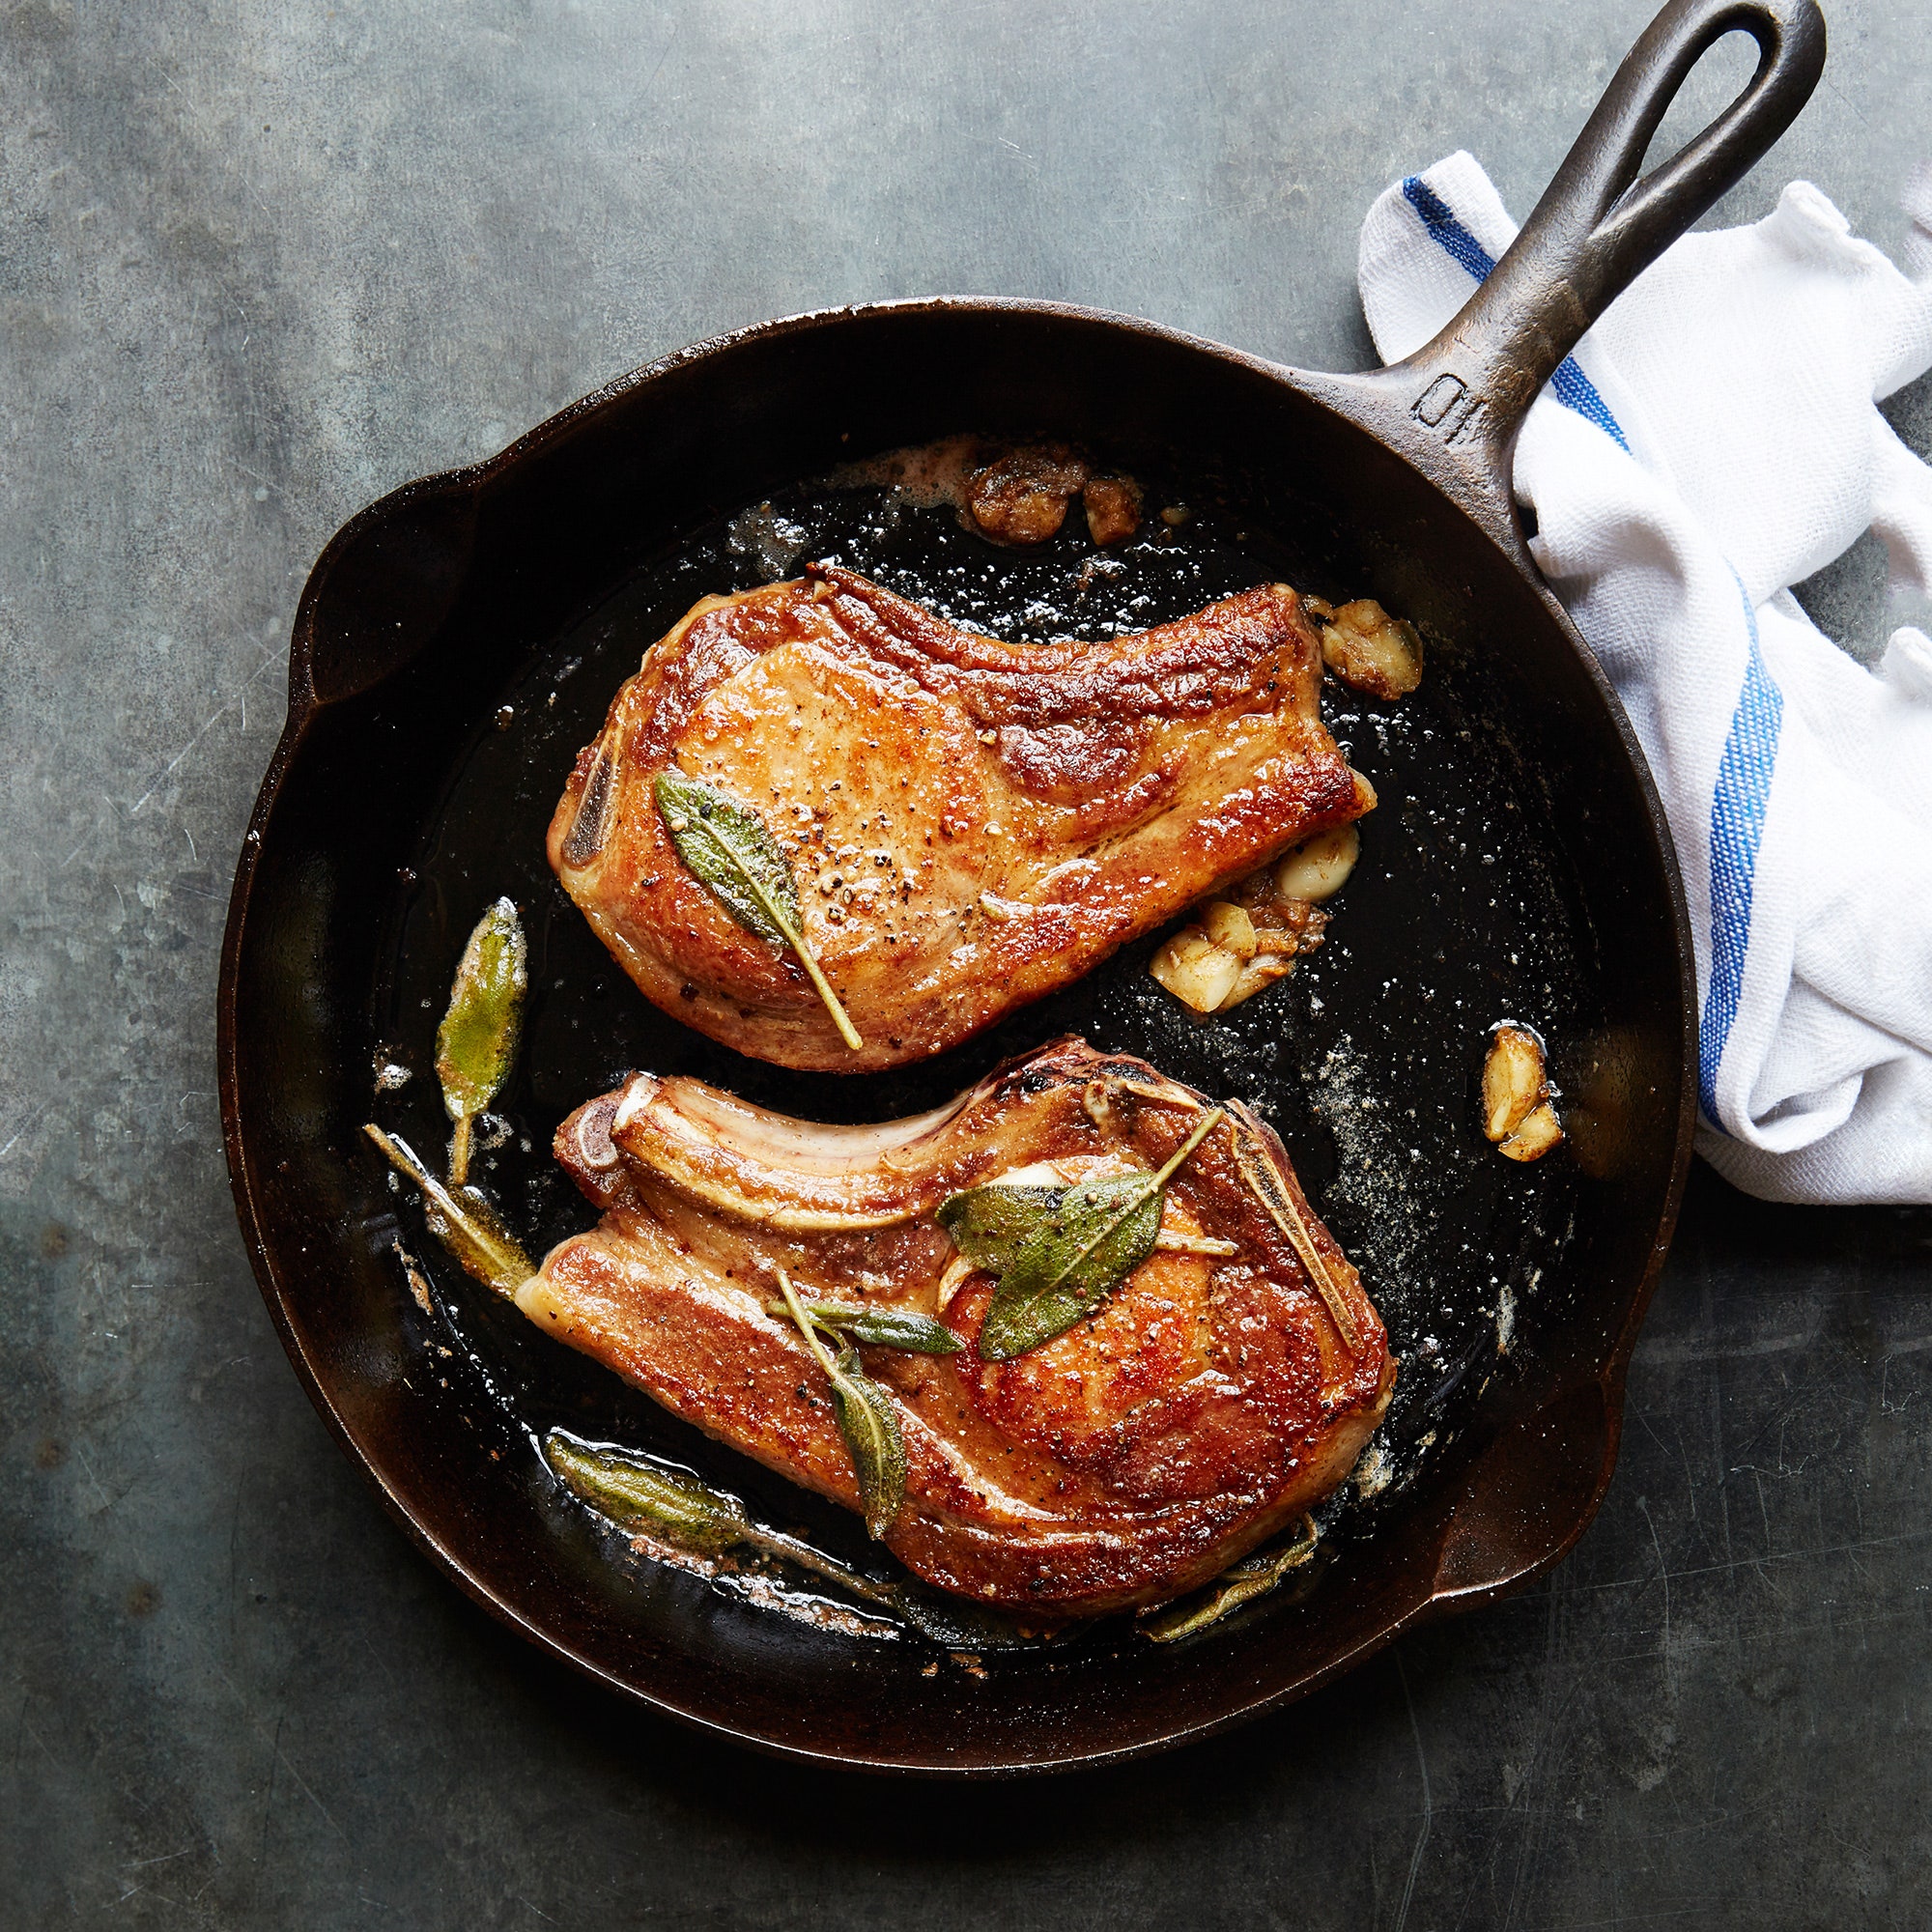 Skillet Pepper And Garlic Pork Chops Recipe with Nutritional Benefits & Serving Tips